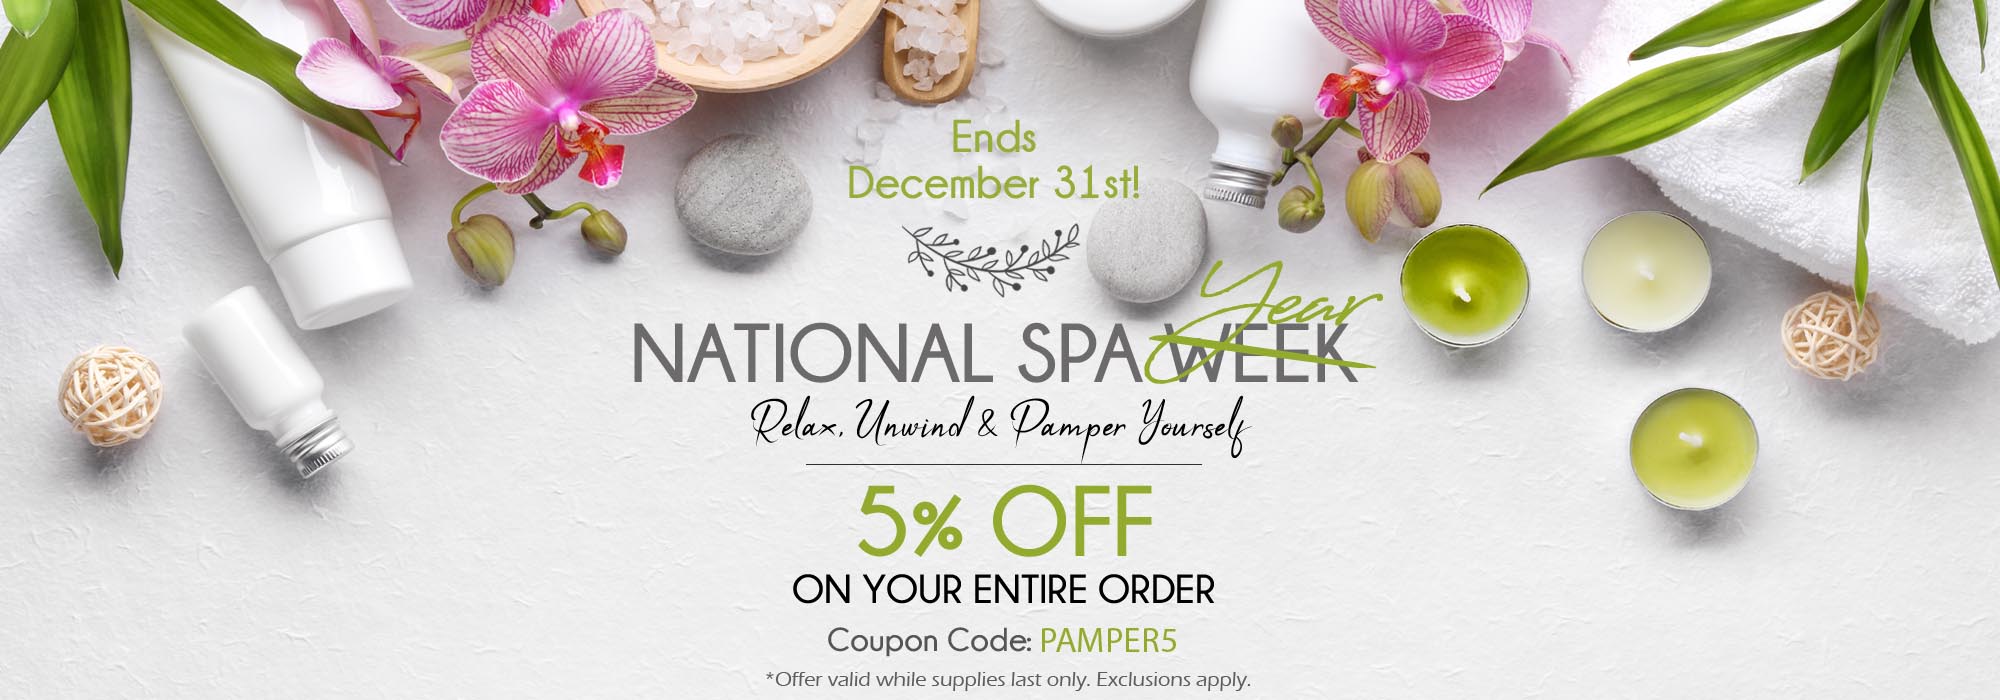 Pamper yourself during Organic Pure Oil National Spa Week Promotion for the year